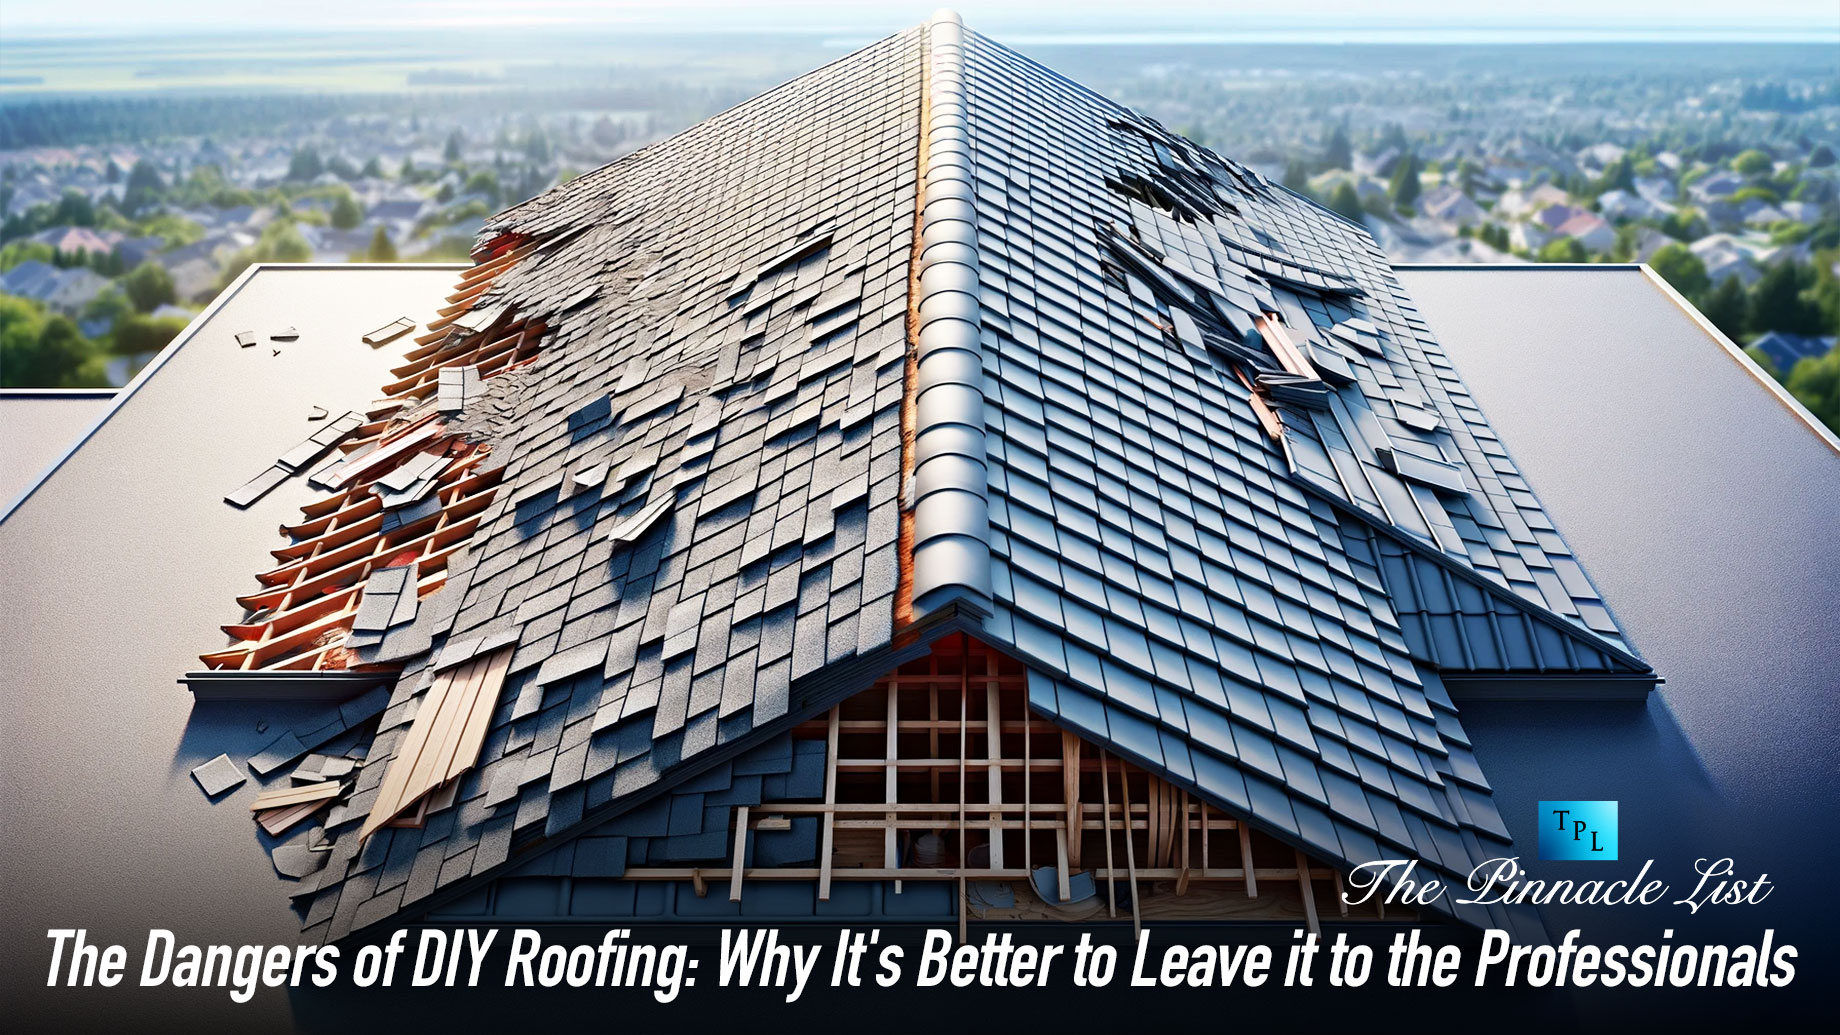 The Dangers of DIY Roofing: Why It's Better to Leave it to the Professionals